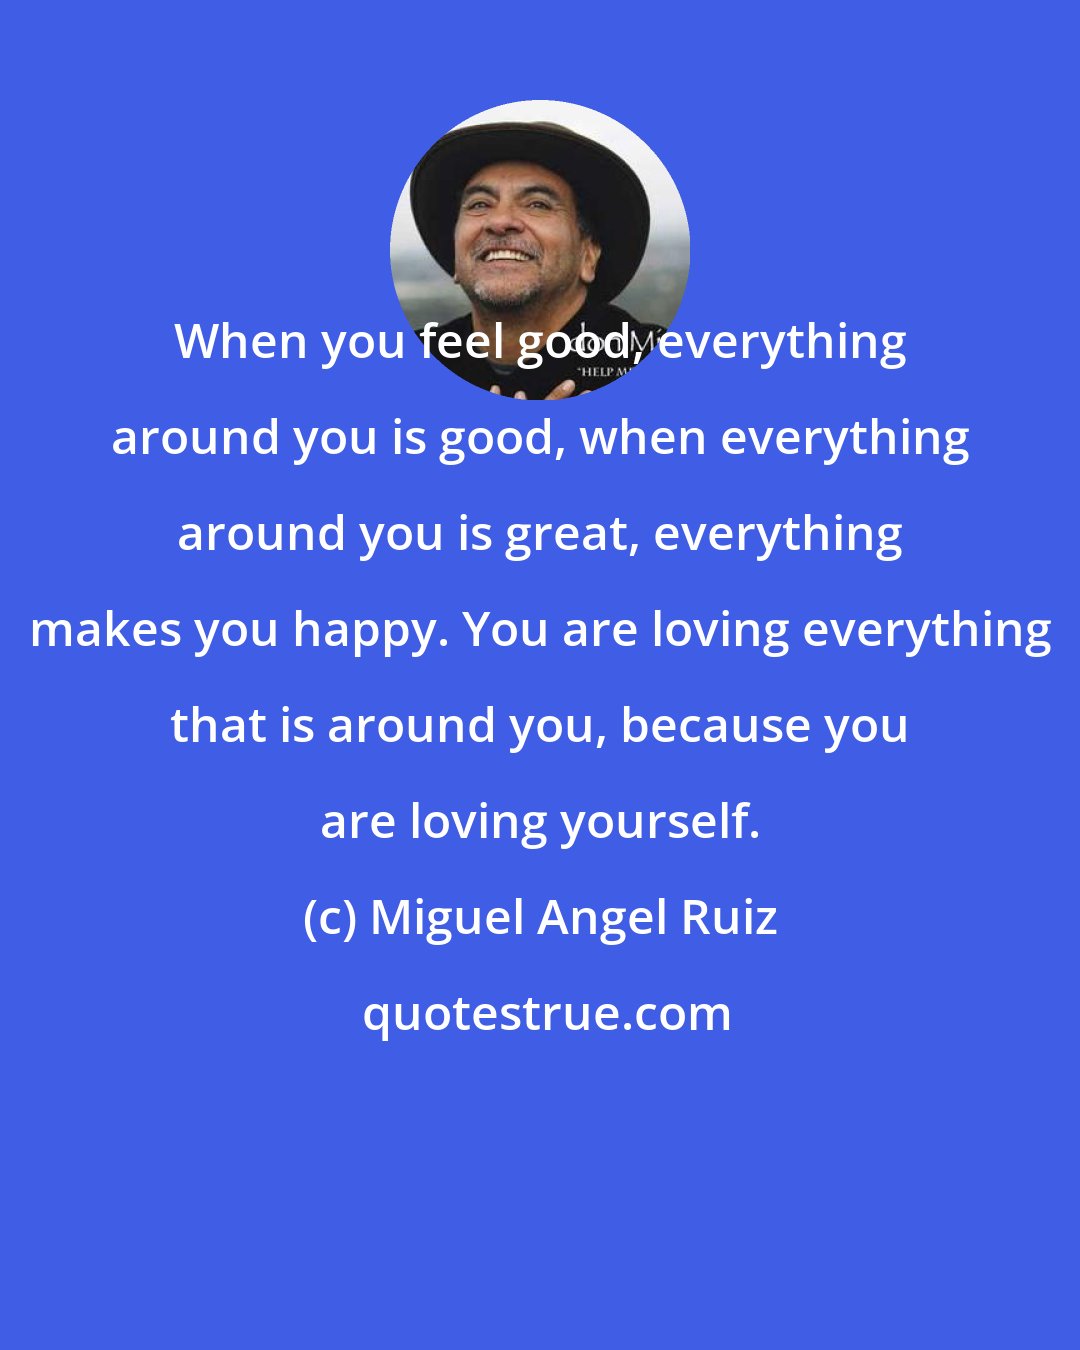 Miguel Angel Ruiz: When you feel good, everything around you is good, when everything around you is great, everything makes you happy. You are loving everything that is around you, because you are loving yourself.